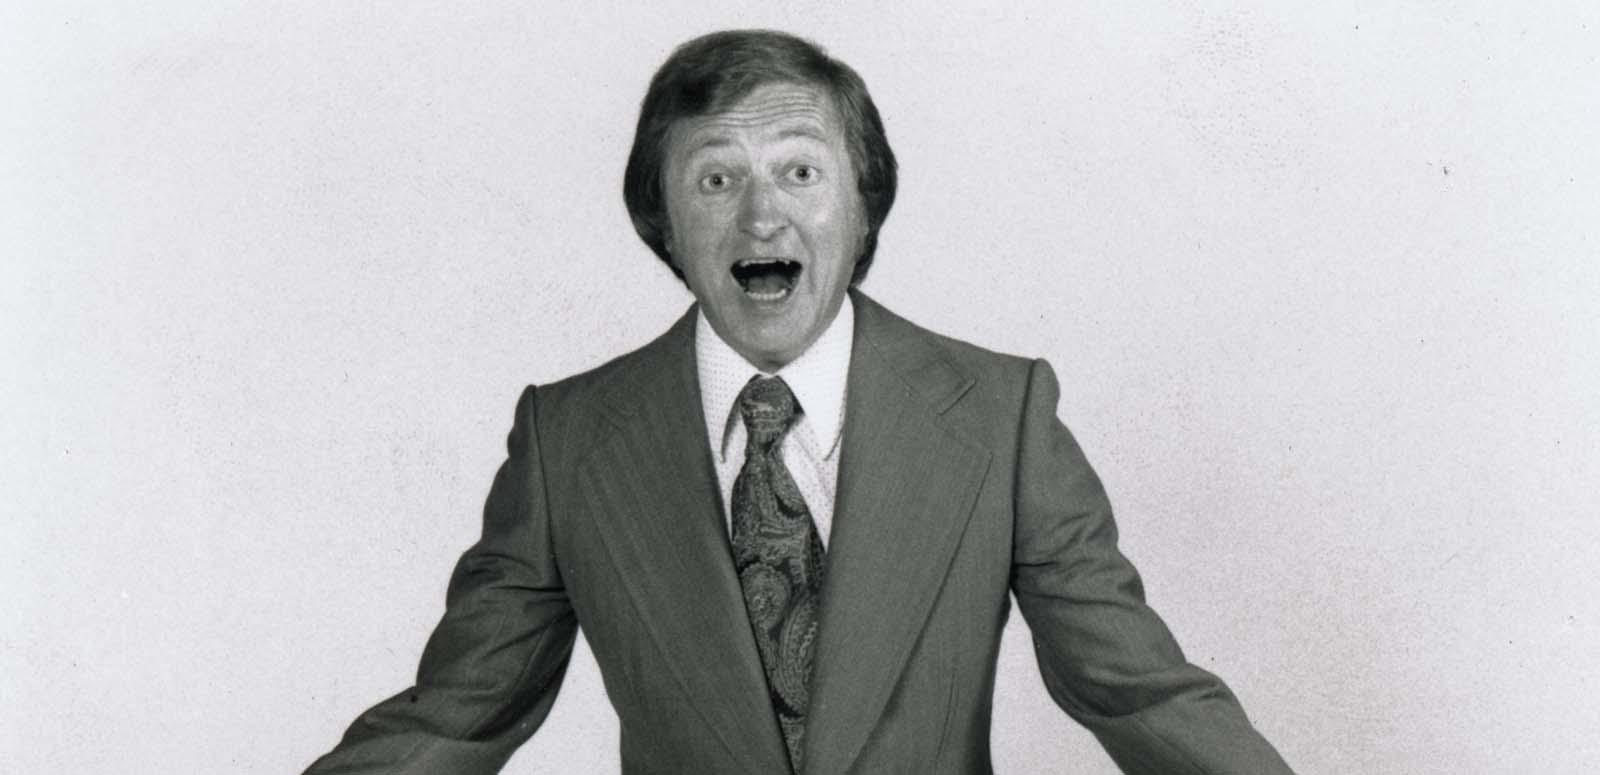 A 1970s publicity shot of Graham Kennedy wearing a suit and exclaiming at the camera.